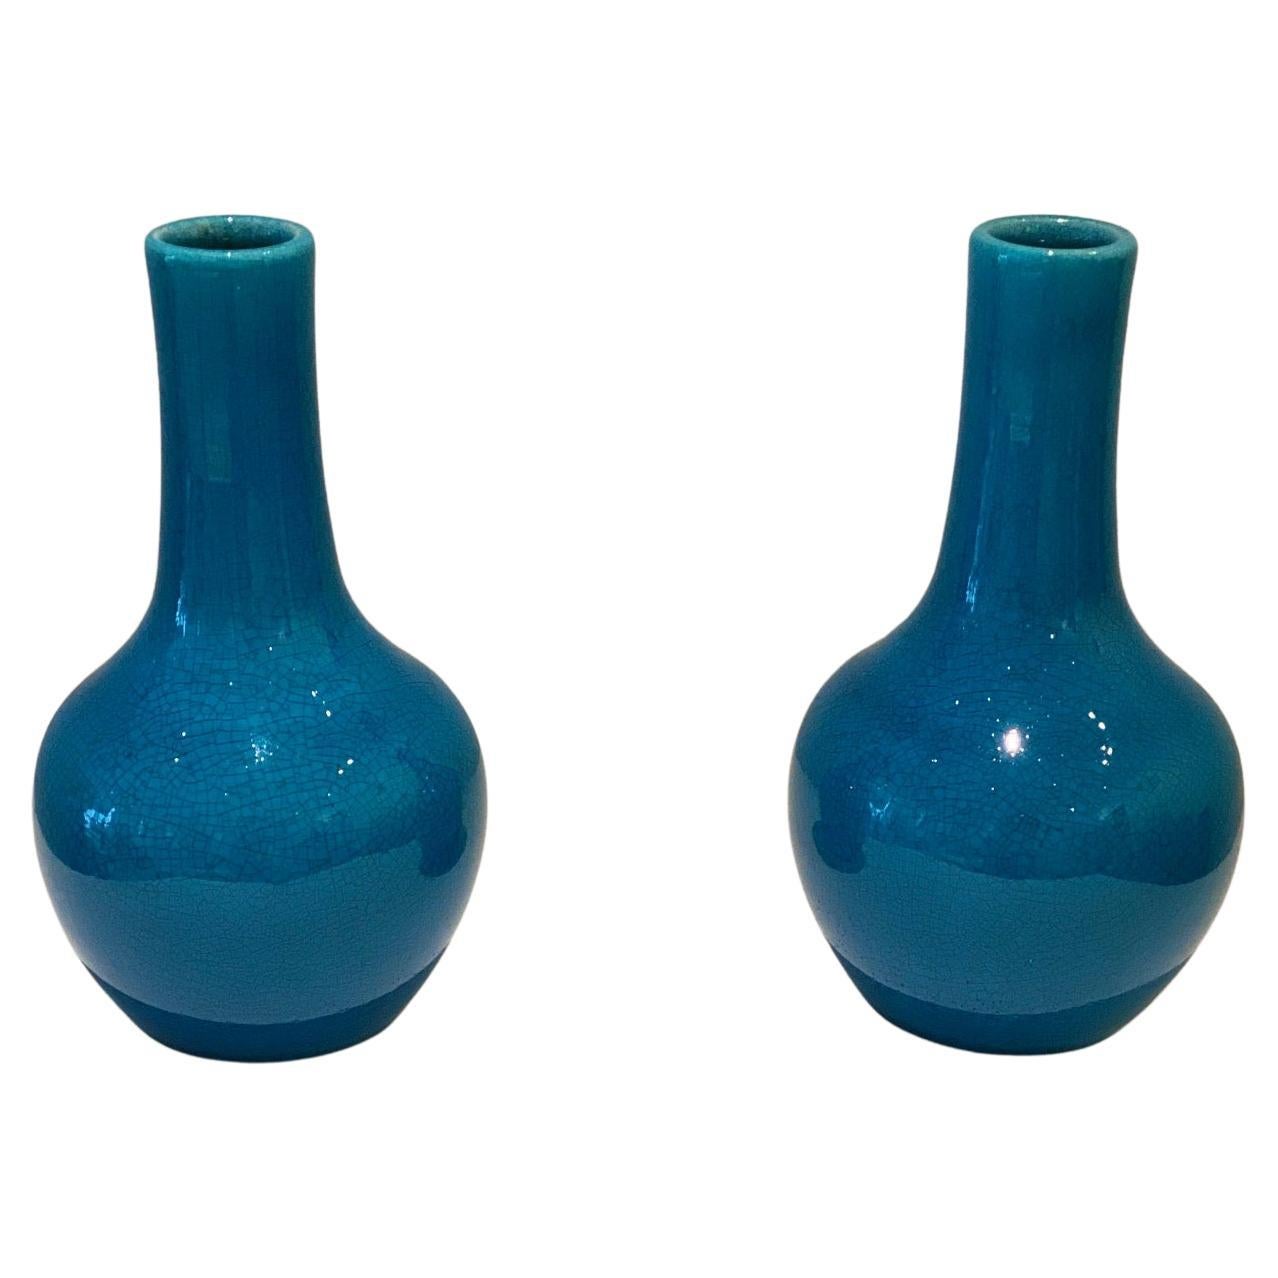 Pol Chambost 1970's Pair of Blue Ceramic Small Vases